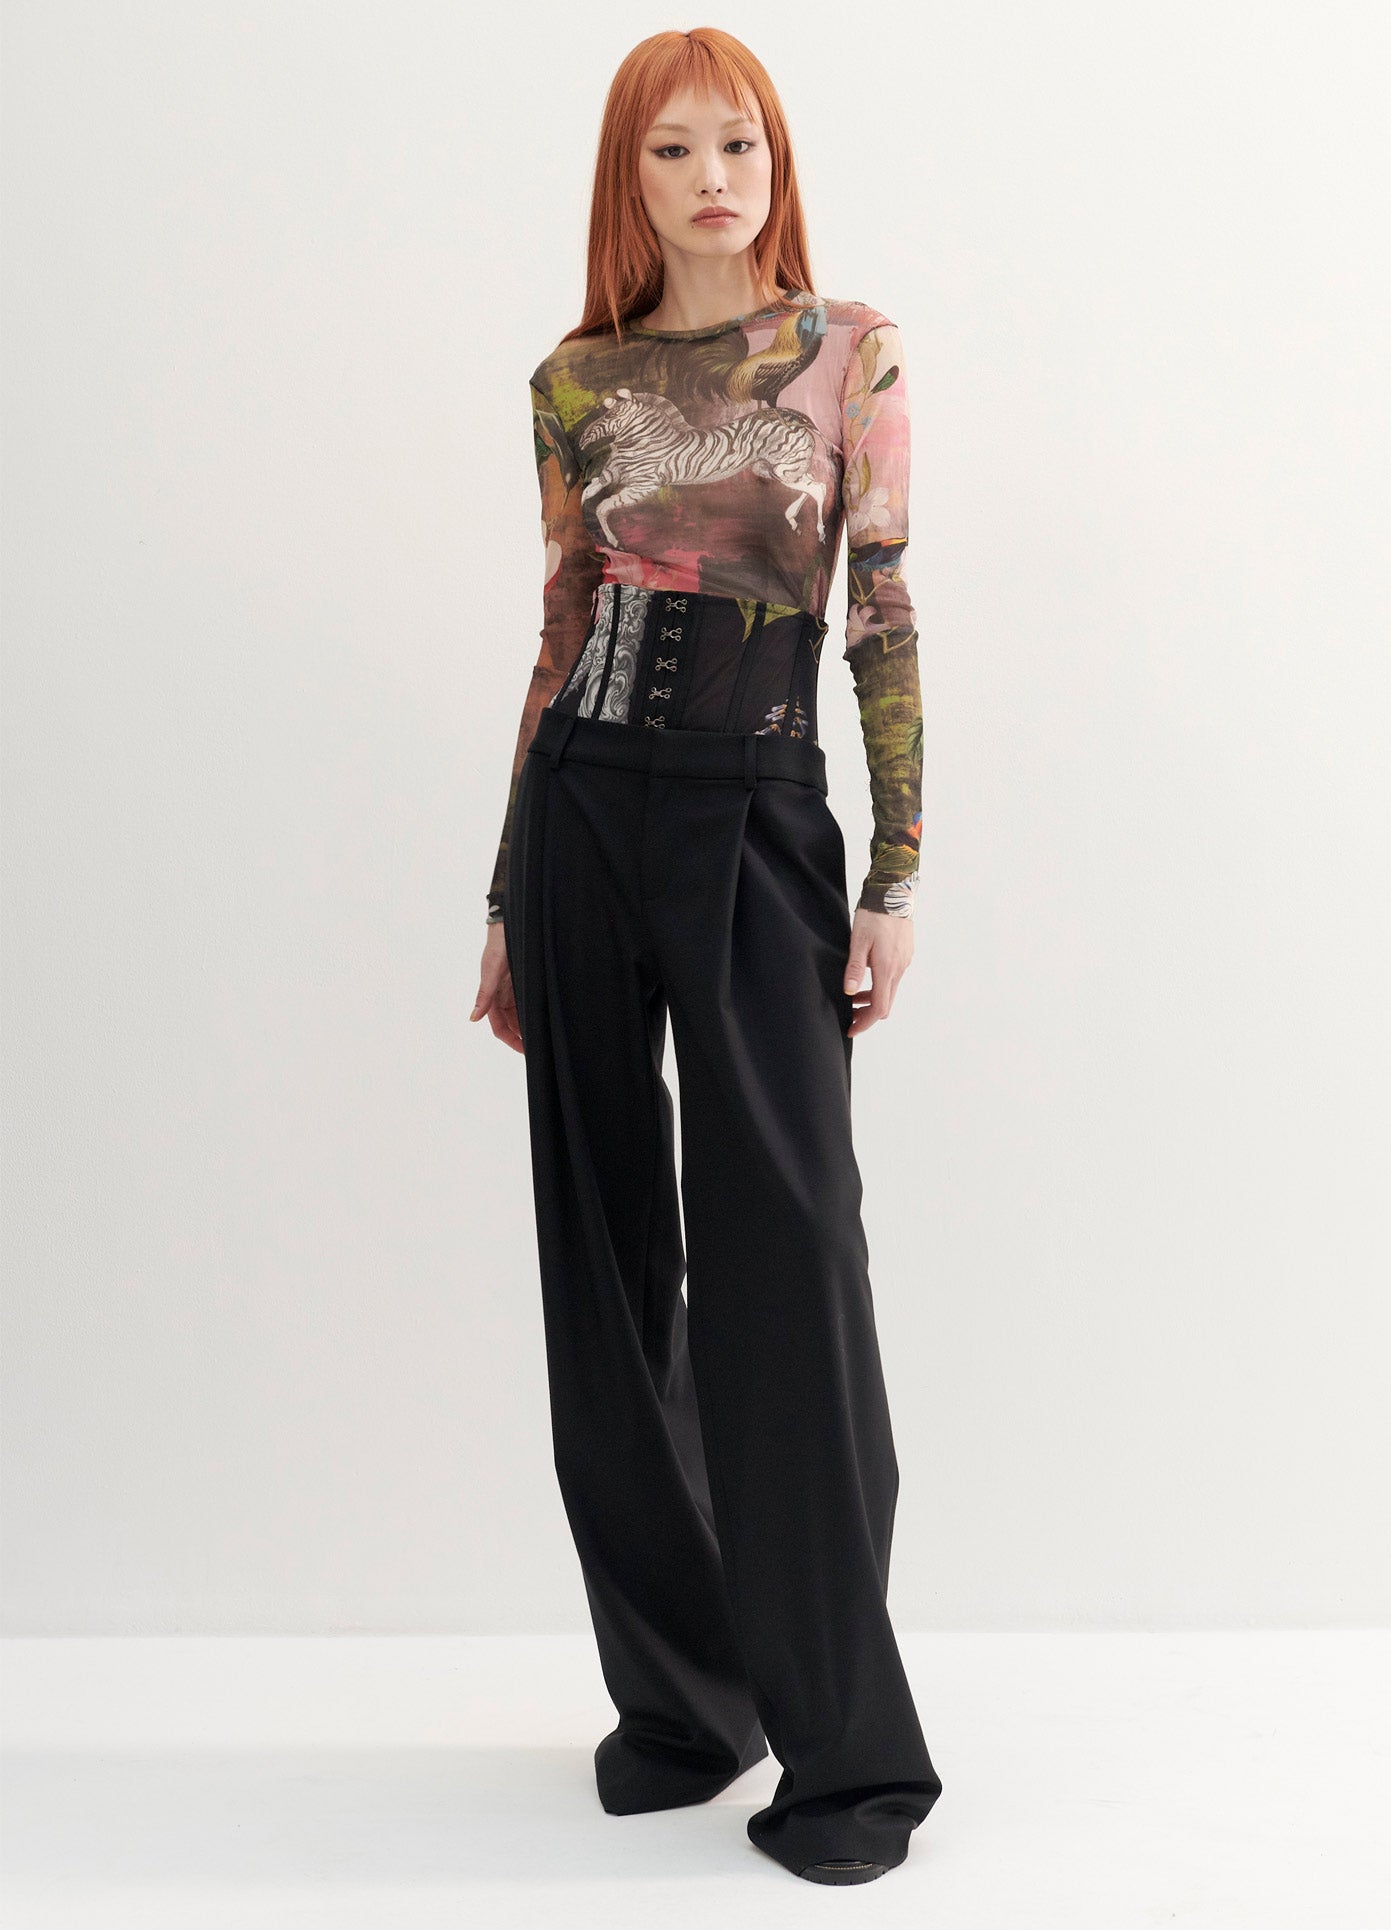 MONSE Print Bustier Trousers in Black on Model Full Front View Main